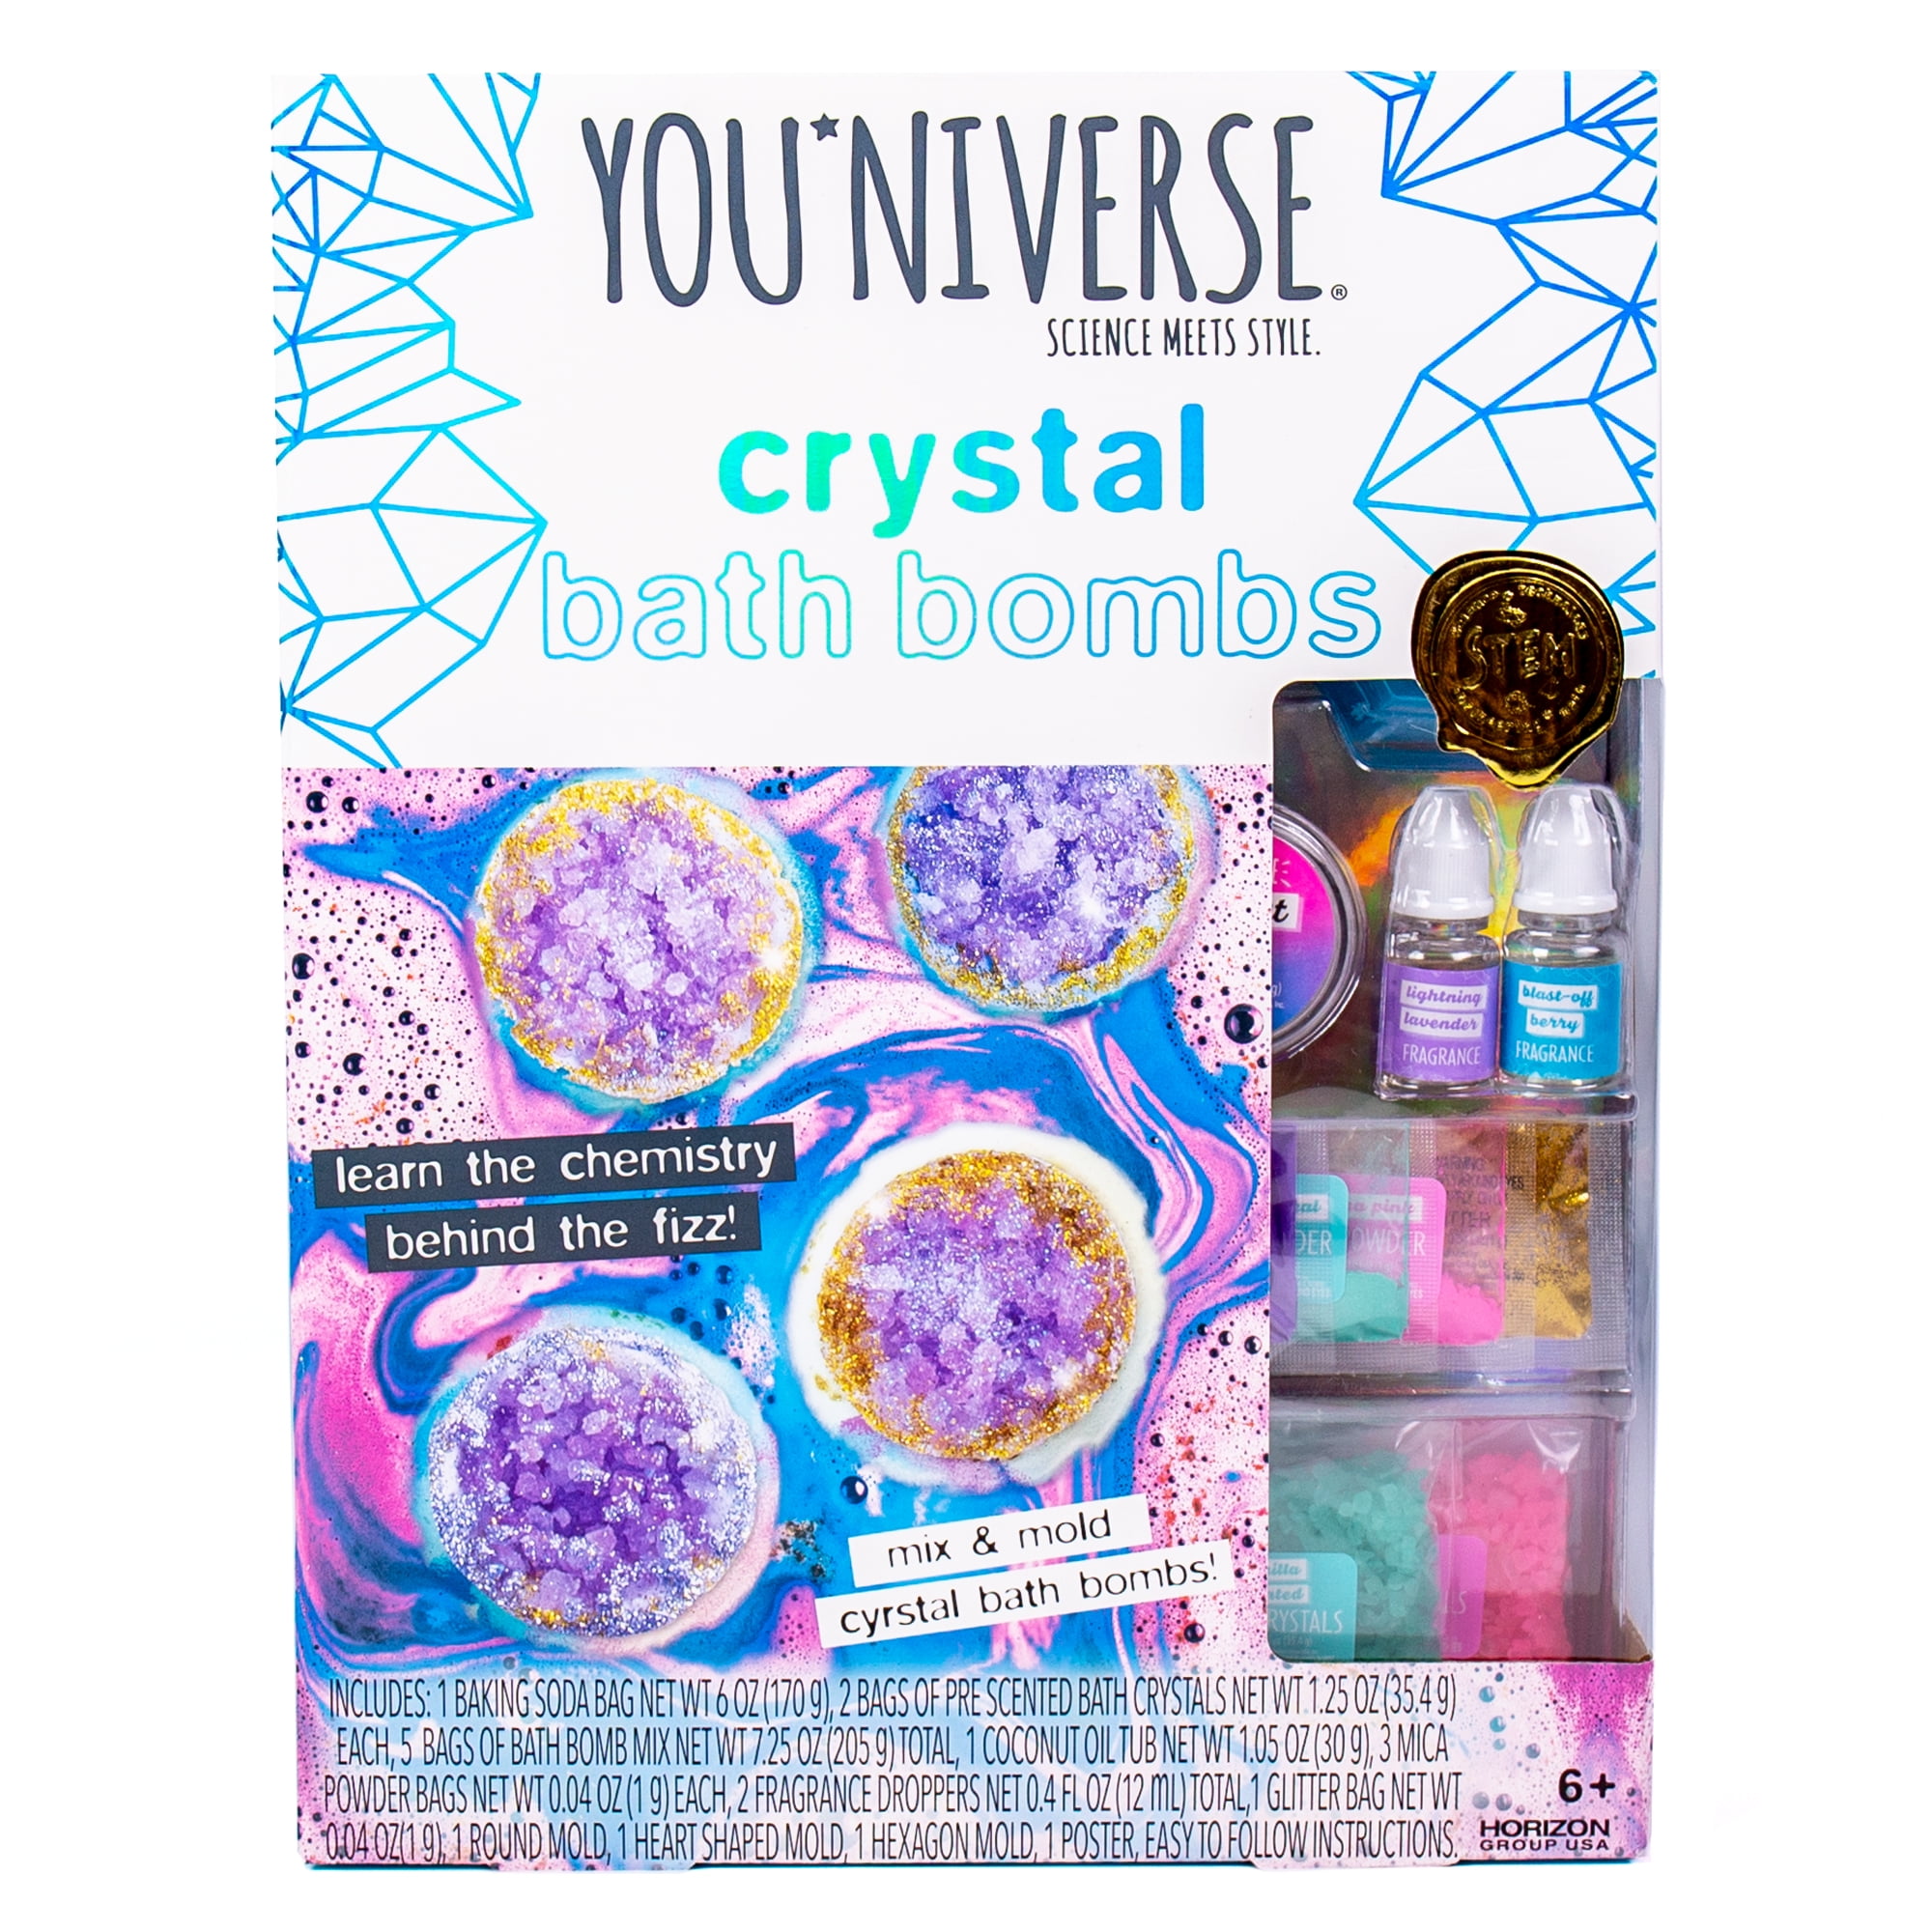 YOUniverse Crystal Bath Bombs, Mix & Mold Your Own Bath Bombs, Bath Crystals, Boys and Girls, Ages 6 and Up